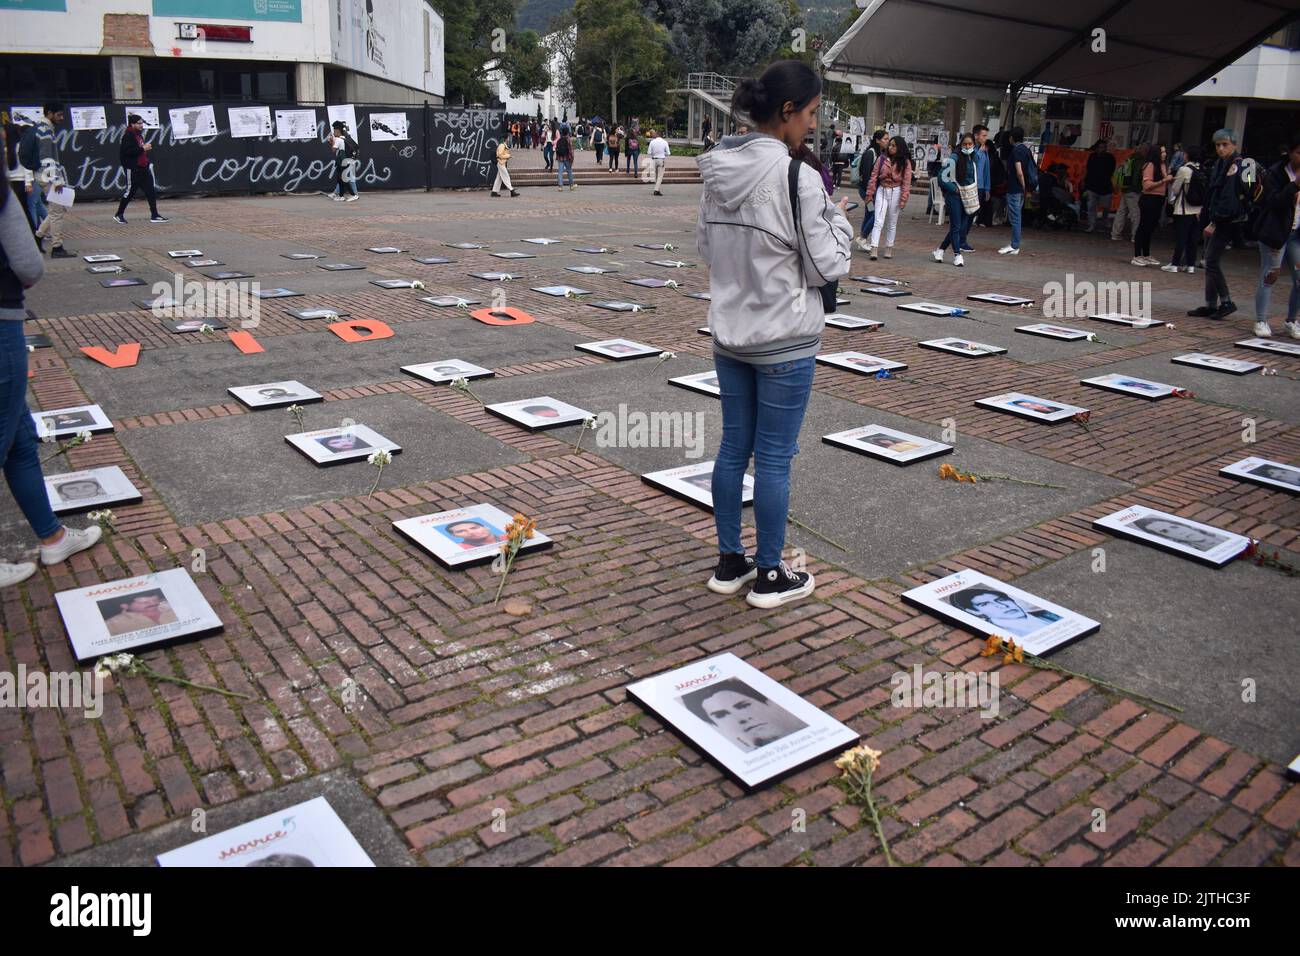 Bogota, Colombia, August 30, 2022. Photos of victims of enforced disapearances are seen with the word phrase 'Never Forgotten' during the framework of the International Day of the Victims of Enforced Disappearances in Bogota, Colombia, August 30, 2022. According to Colombia's Victims unit more than 130.000 people had been indirect victims of Enforced Disappearances in Colombia and at least 50.000 had been direct victims of this crime. Photo by: Cristian Bayona/Long Visual Press Stock Photo